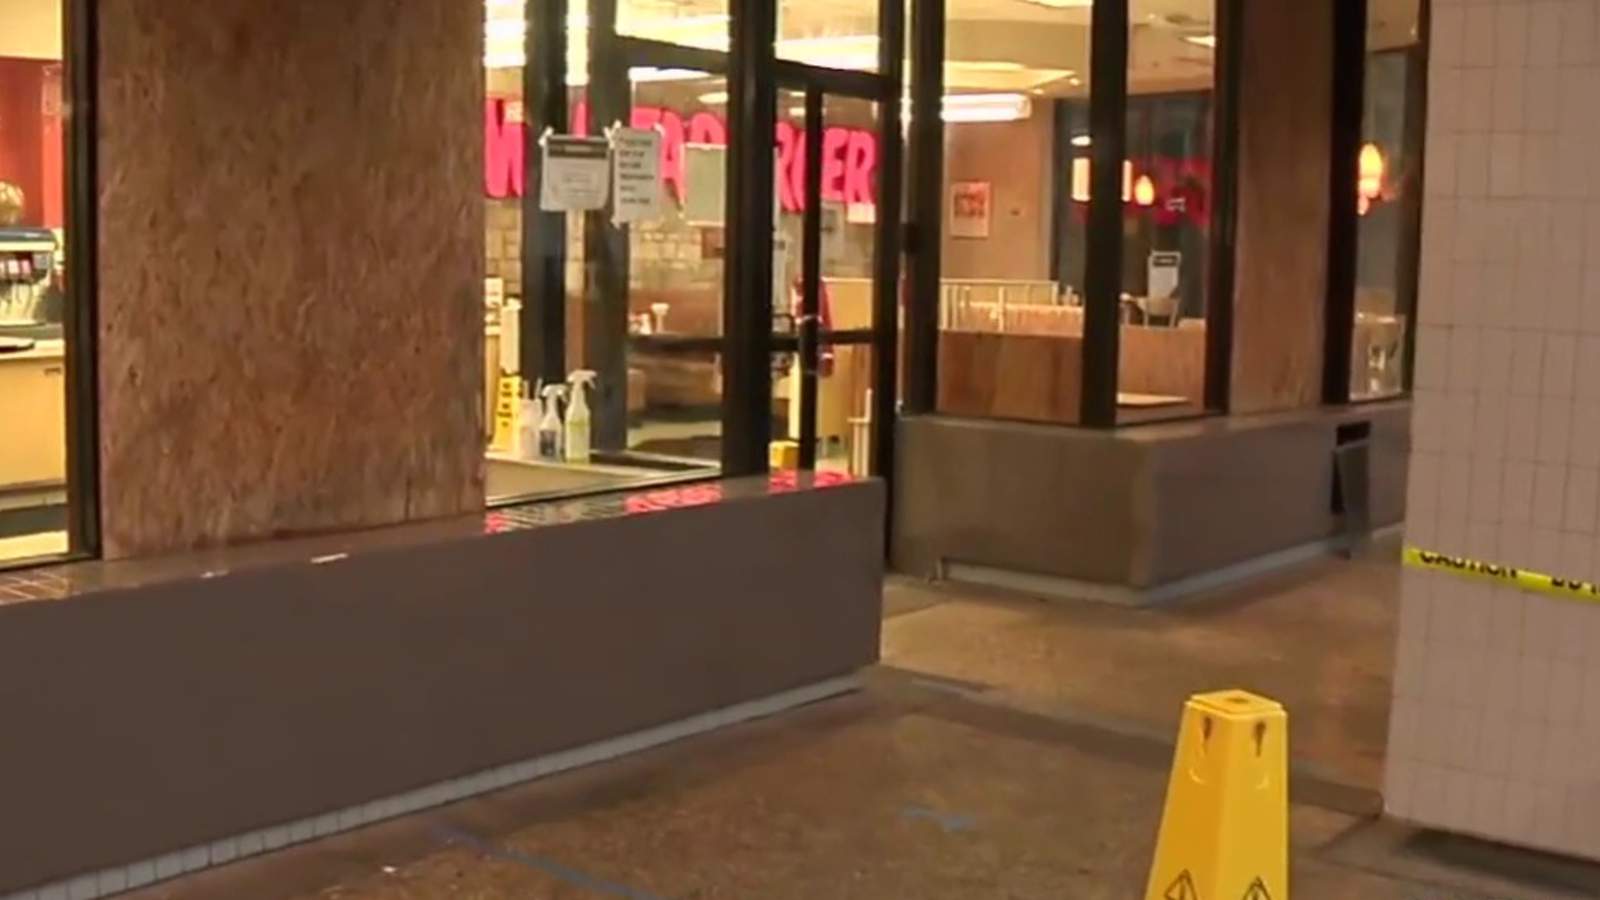 Social media videos show damage, people breaking into Whataburger, Shops at Rivercenter after peaceful protests in downtown San Antonio